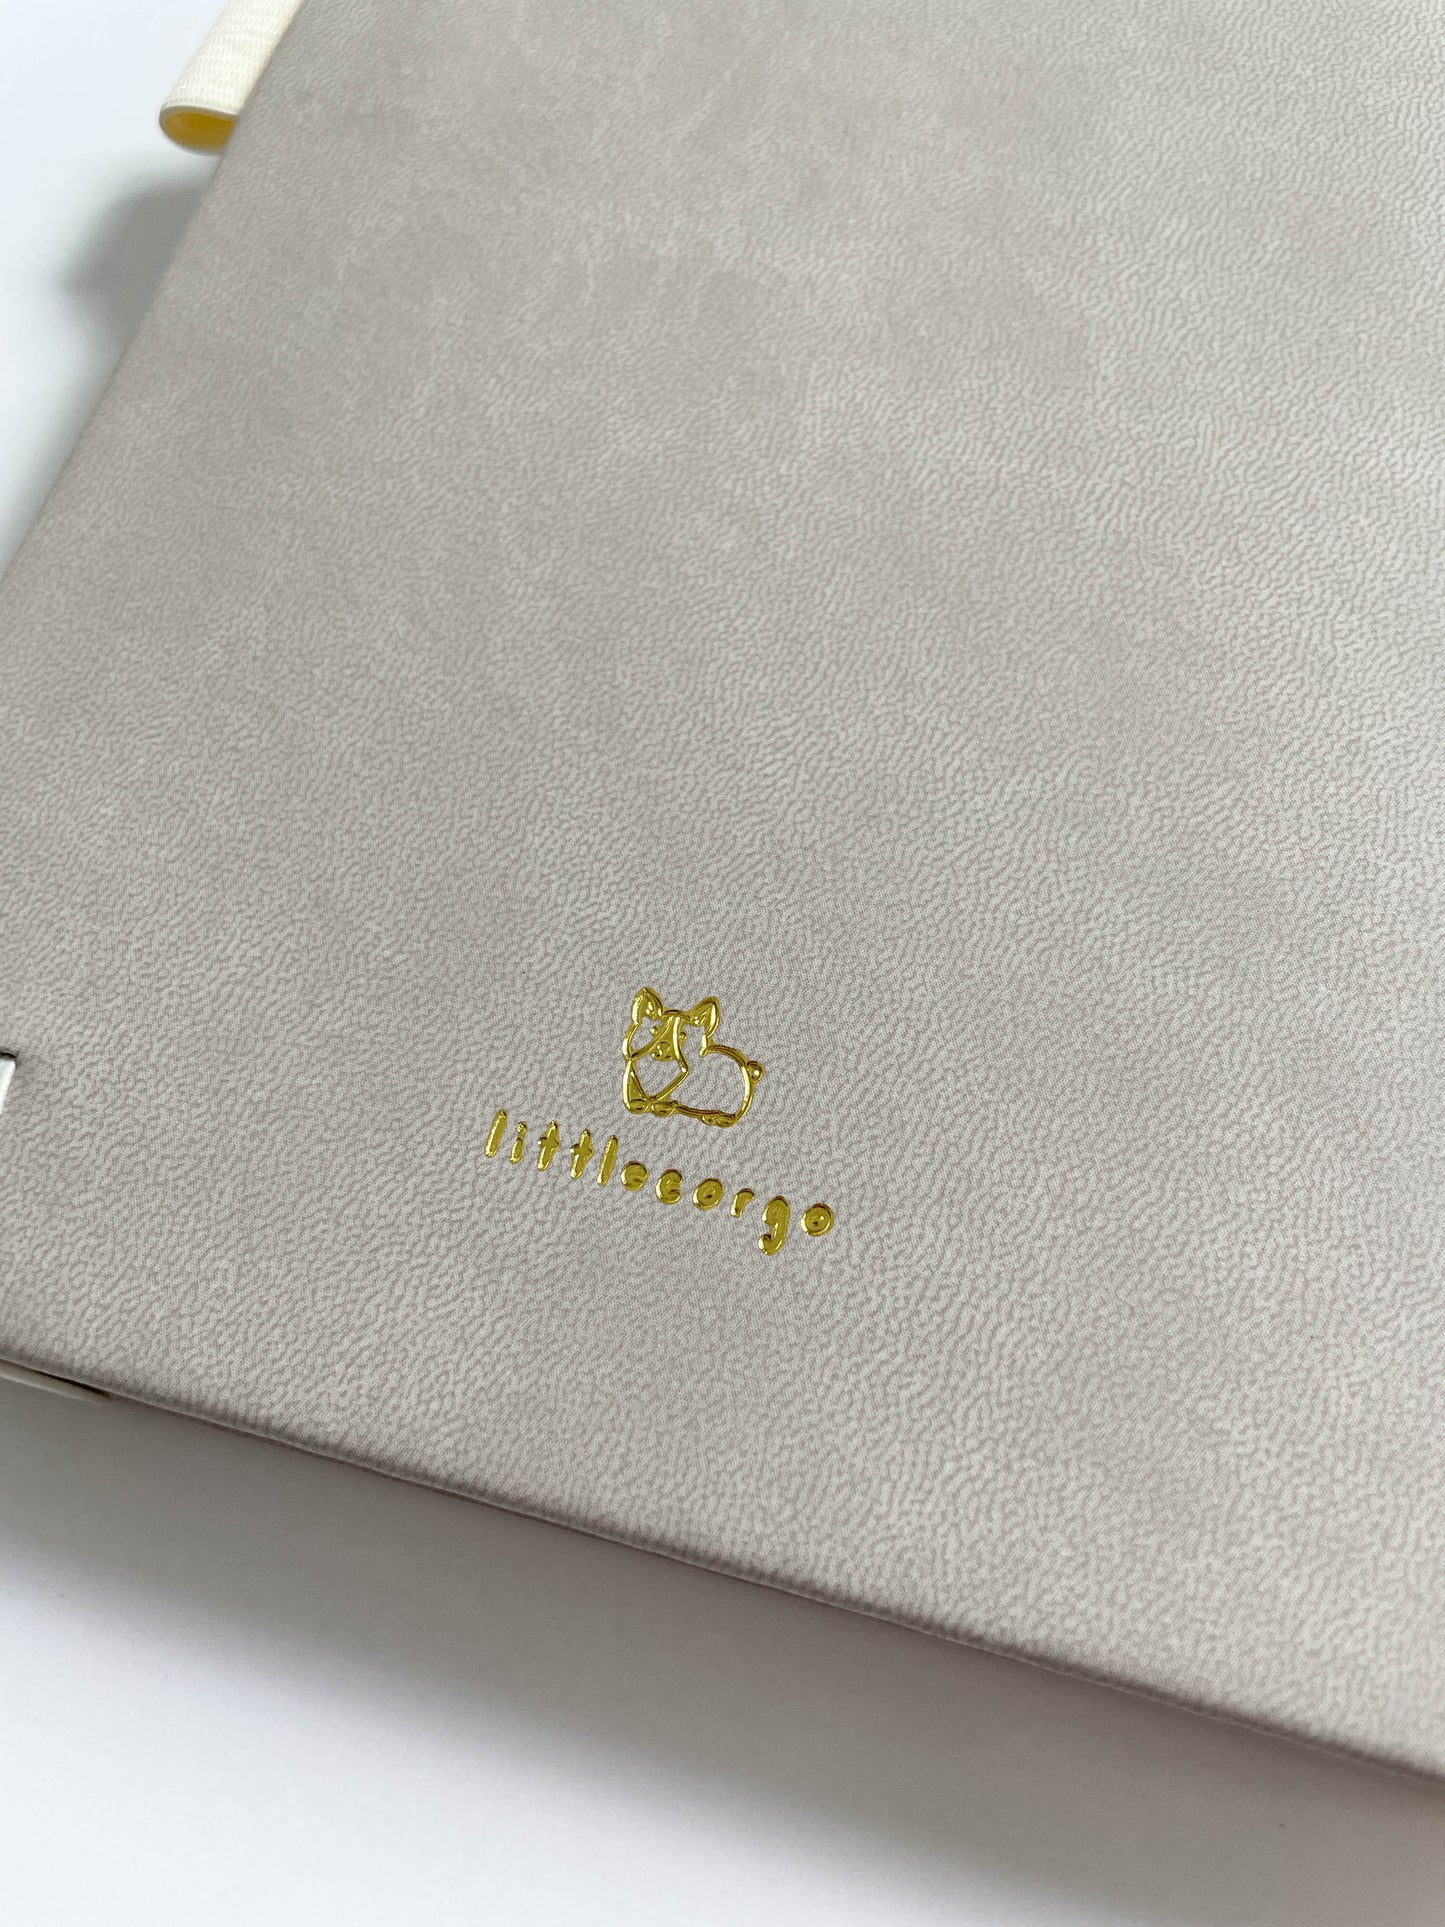 Close up view of the back of an ivory bullet journal's backside, specifically showing the gold foil embossed design of a Corgi and "littlecorgo" text.